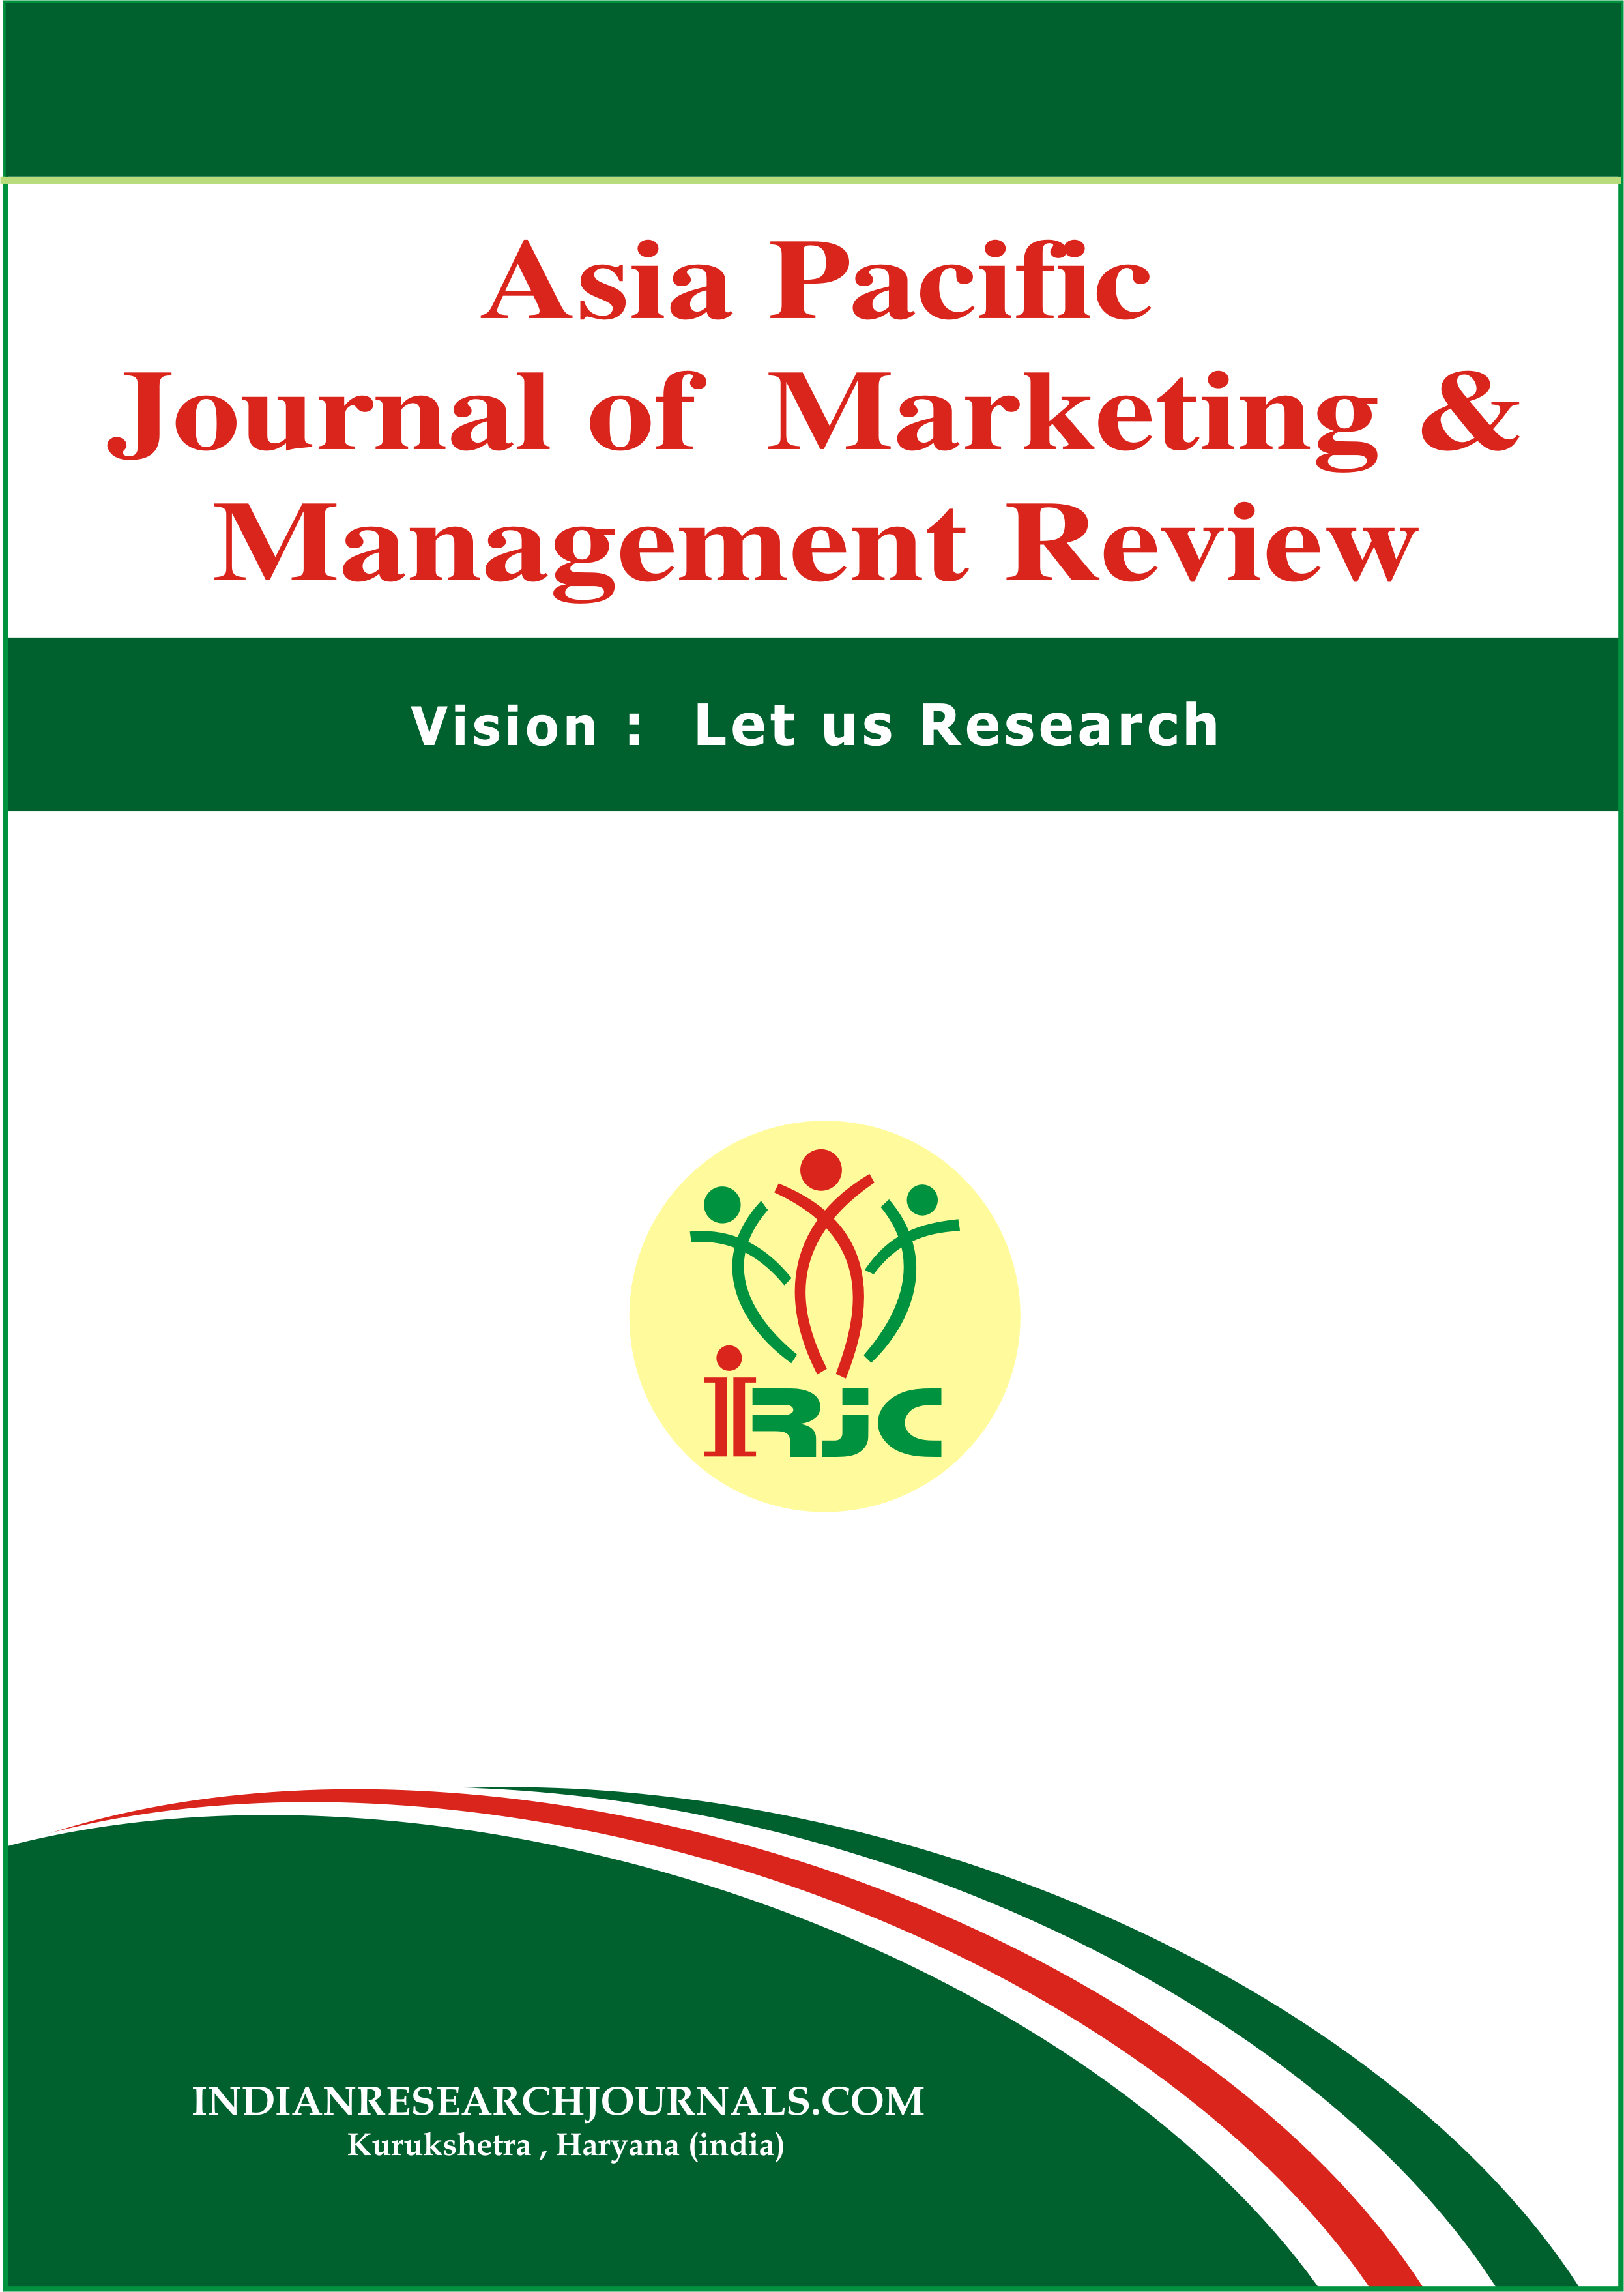 					View Vol. 11 No. 05 (2022): ASIA PACIFIC JOURNAL OF MARKETING & MANAGEMENT REVIEW
				